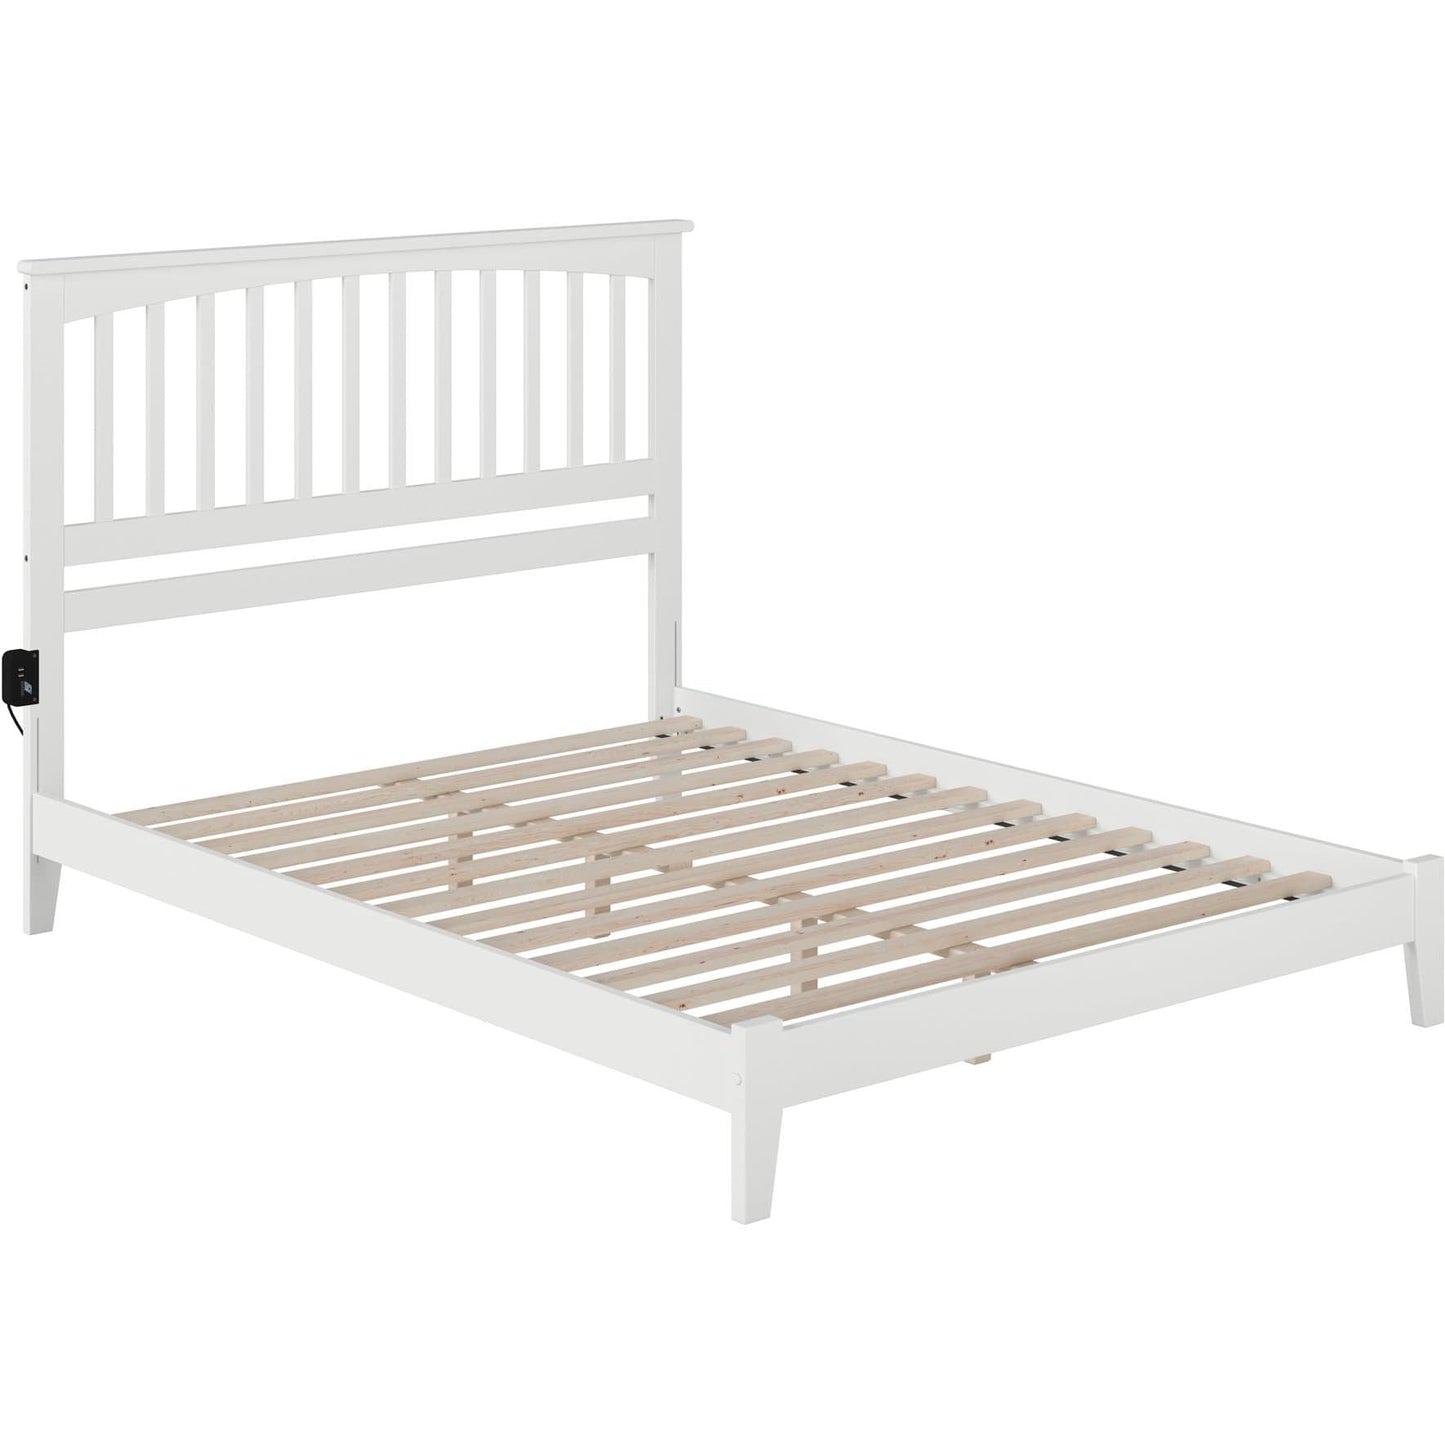 Atlantic Furniture Bed Mission King Platform Bed with Open Foot Board in Espresso